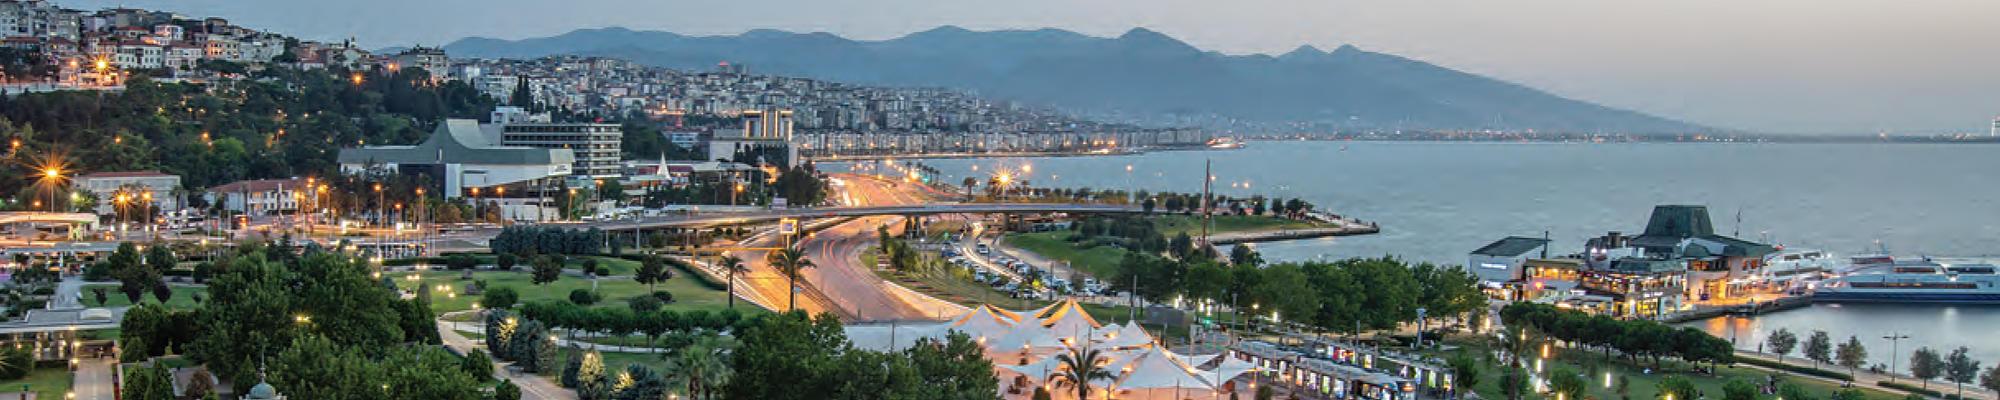 A photo from above of the İzmir waterfront. Mountains are visible in the background